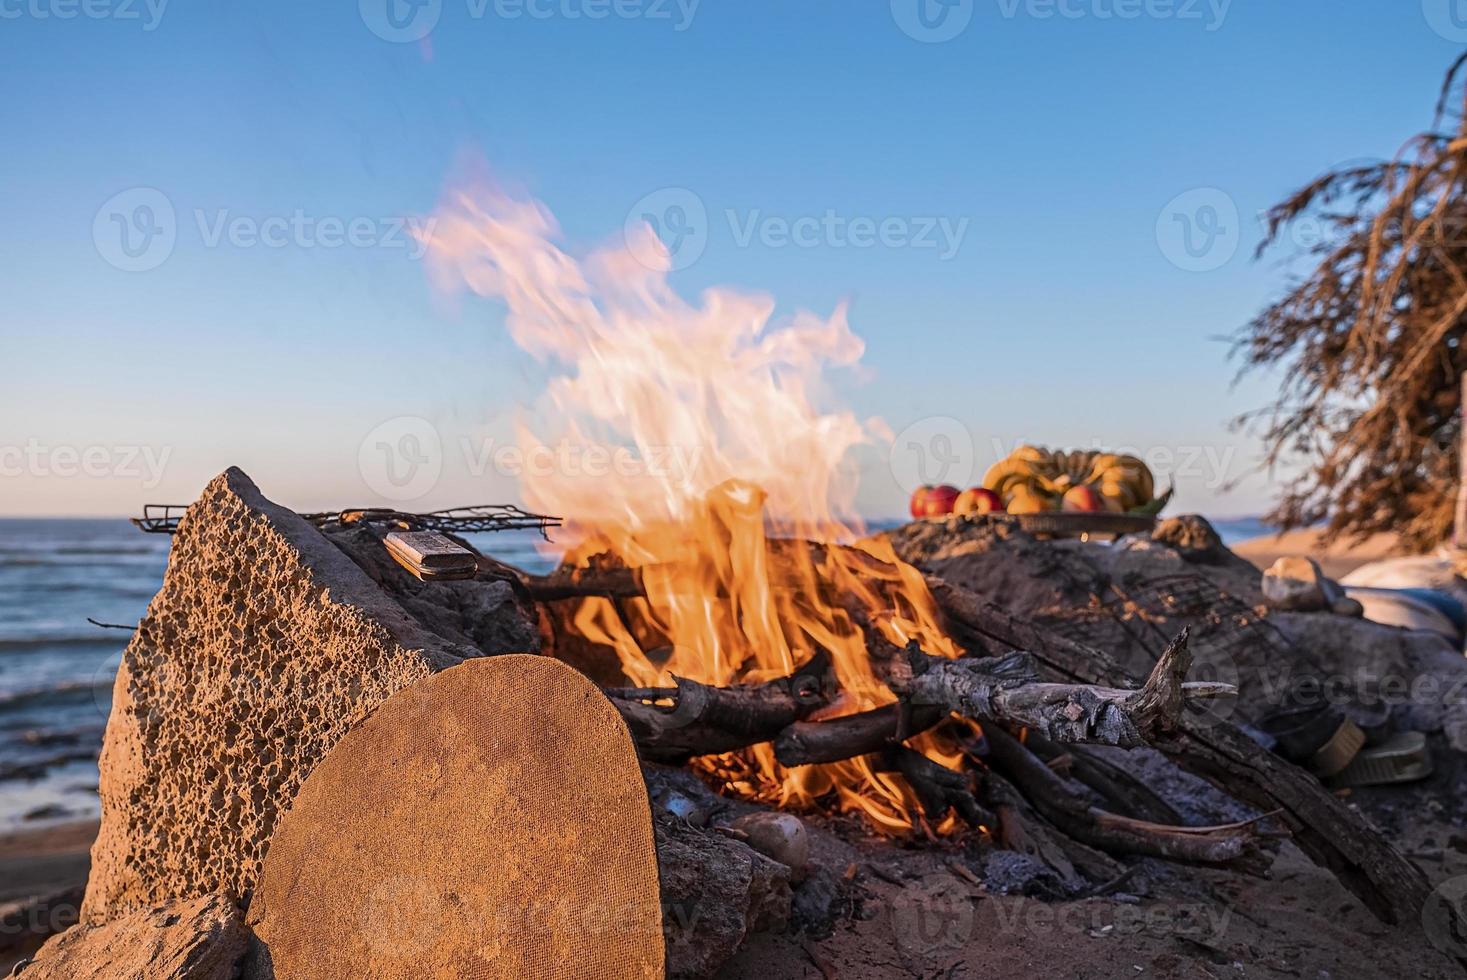 Bonfire with burning firewood on beach in evening against clear sky photo